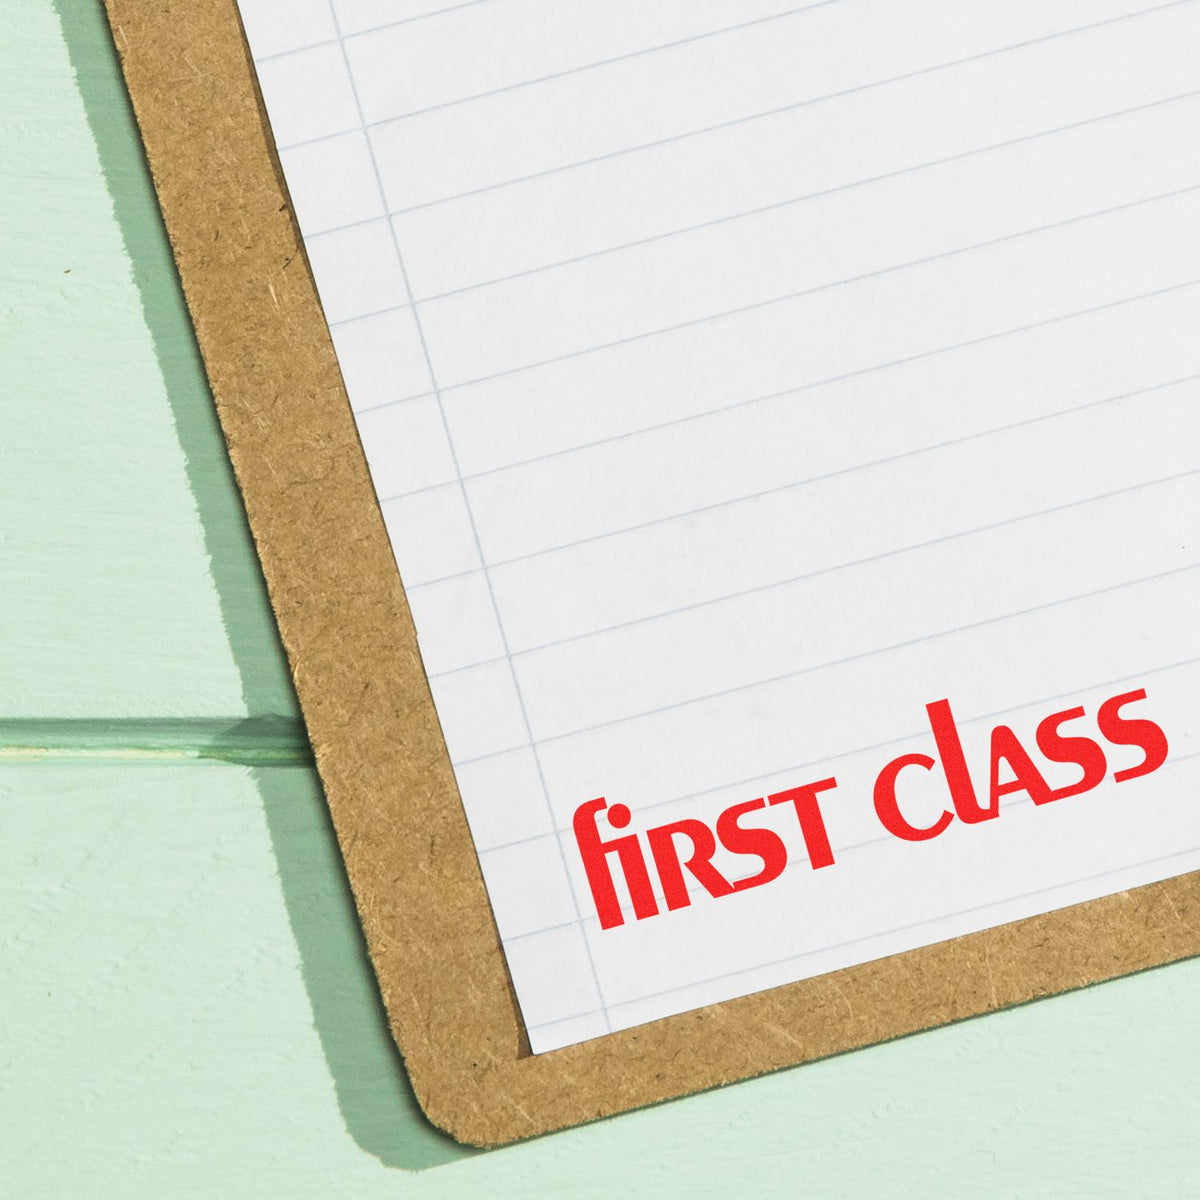 Lower Case First Class Rubber Stamp In Use Photo